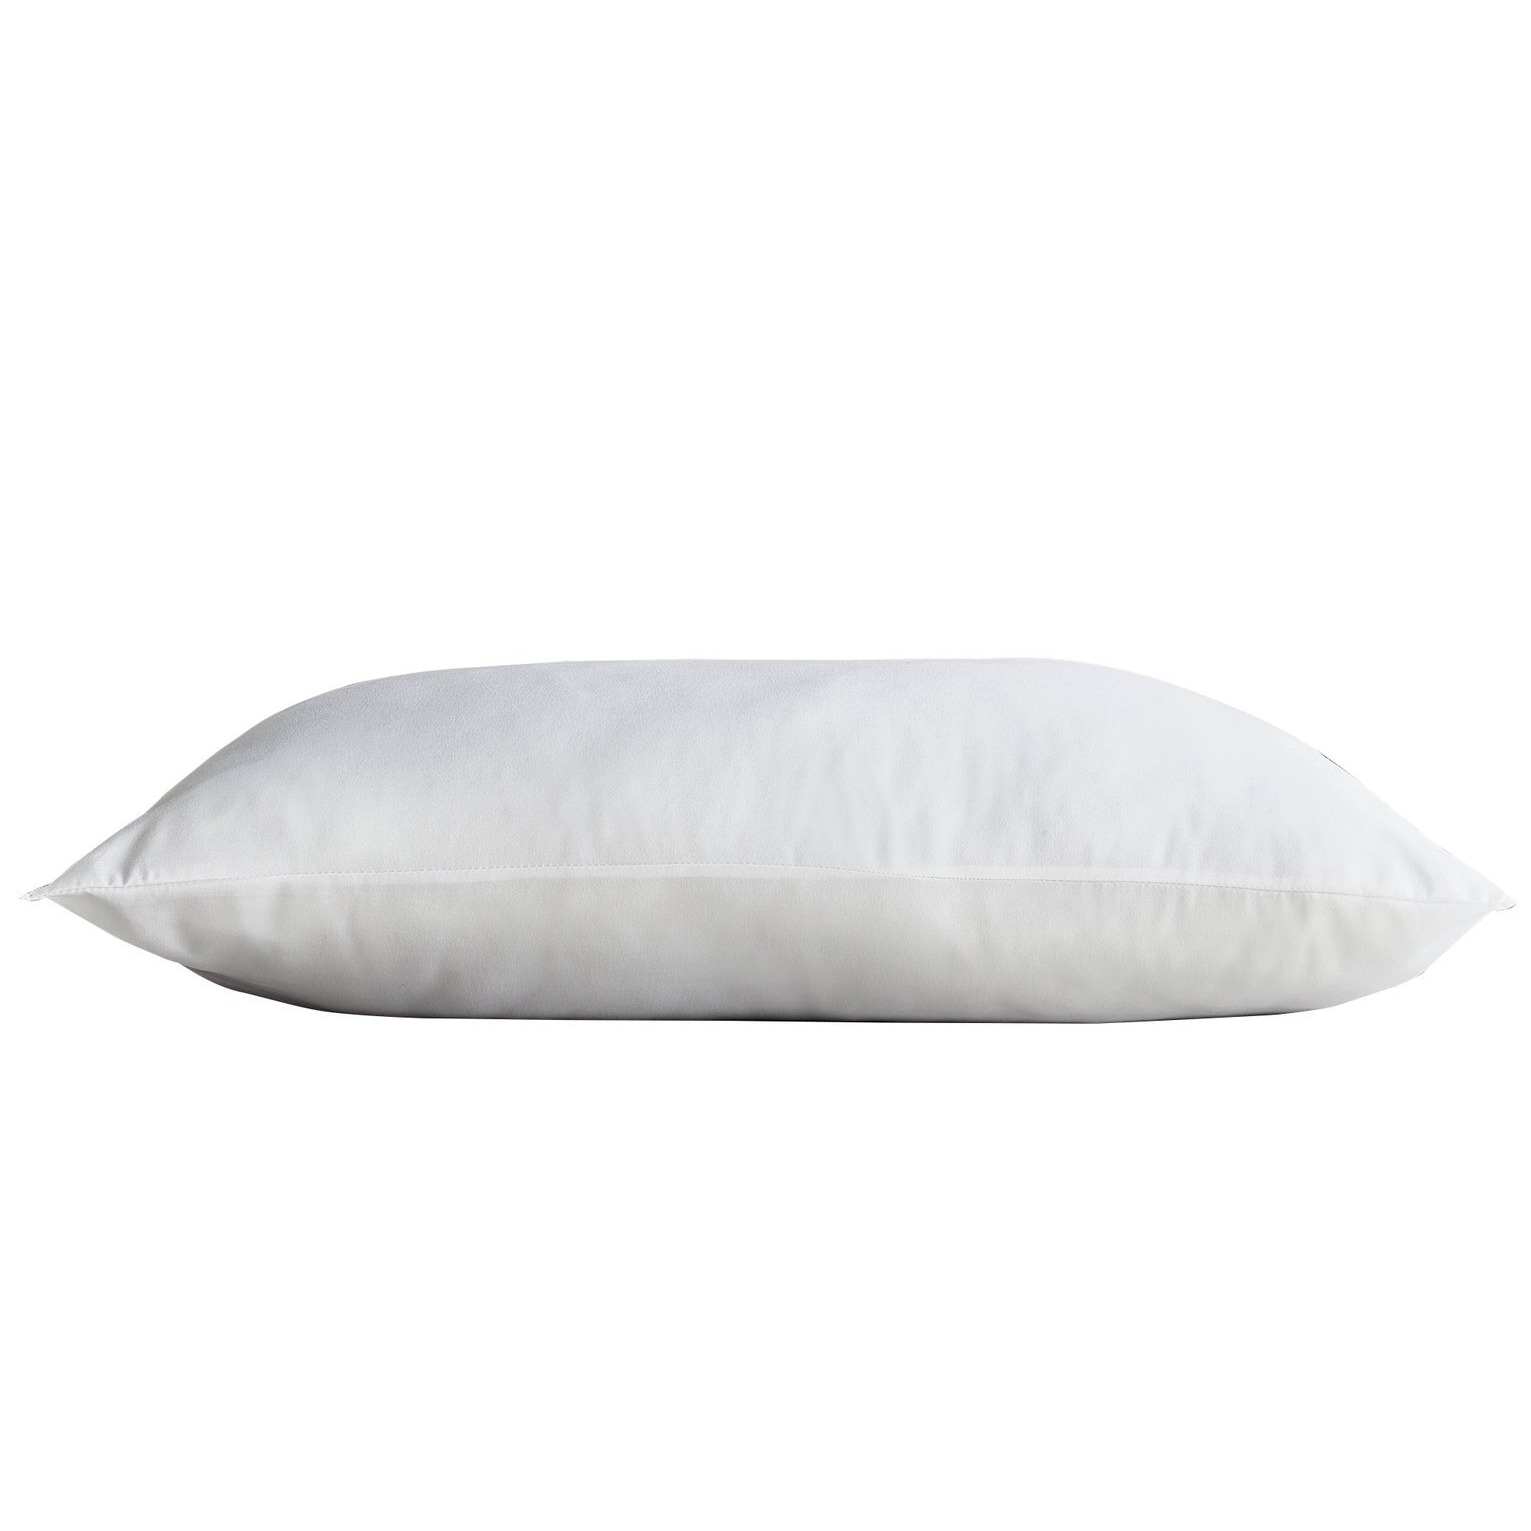 Habitat Supersoft Washable Firm Pillow - 2 Pack - image 1